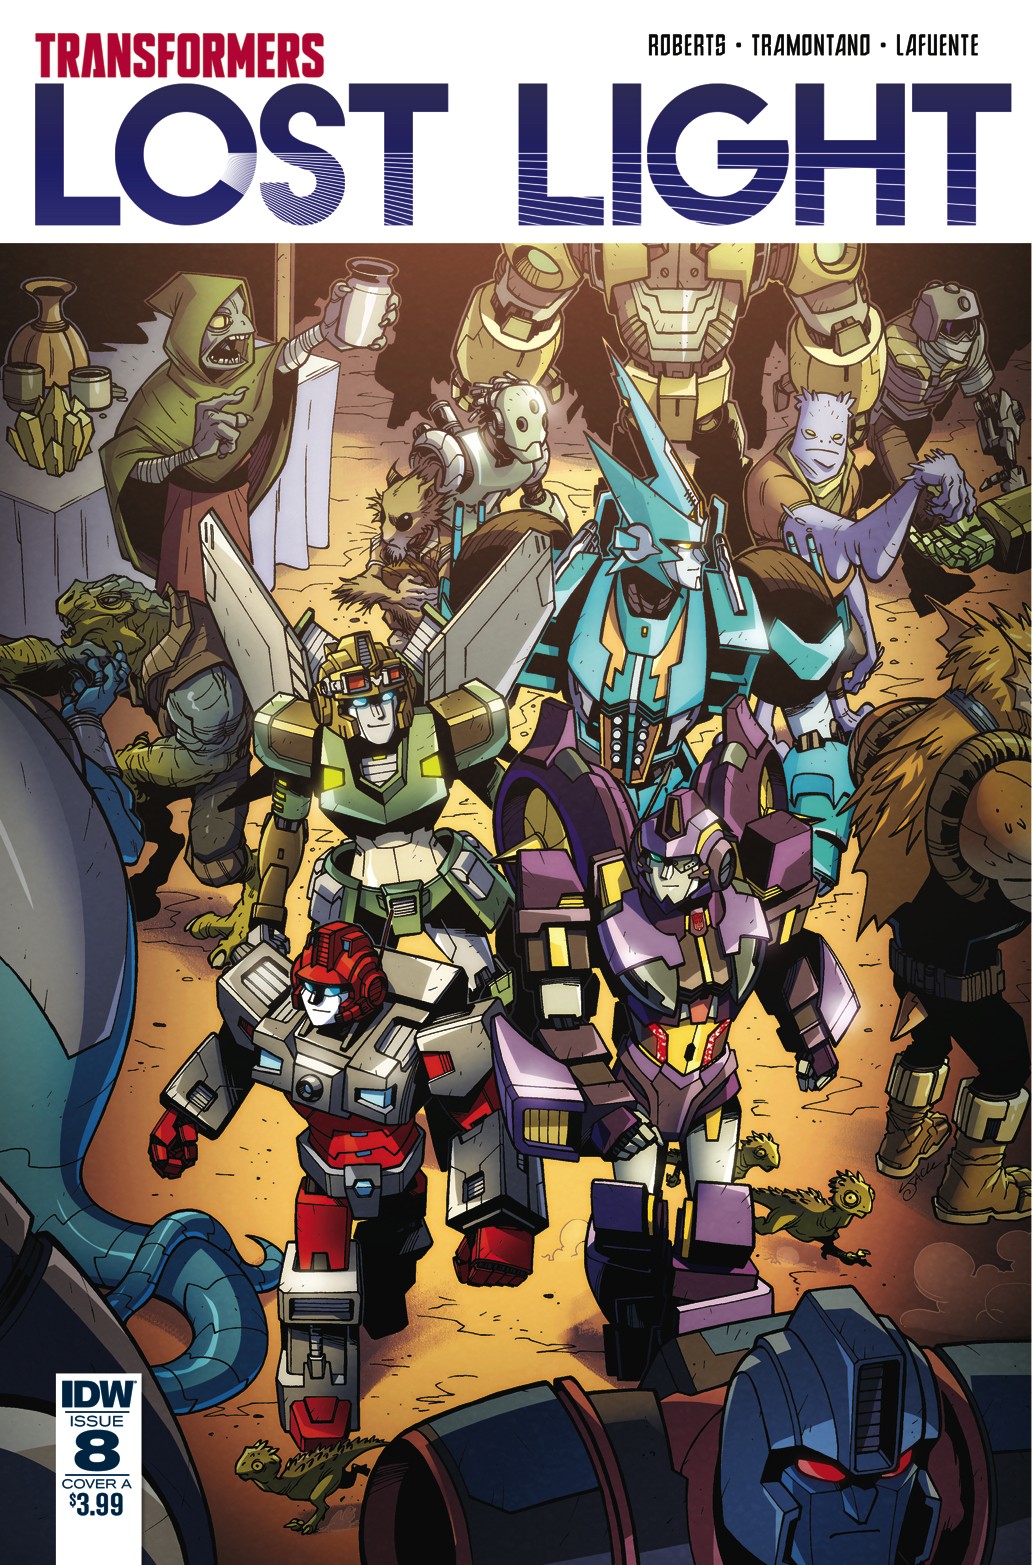 Transformers News: Main Cover Art for IDW Transformers: Lost Light #8